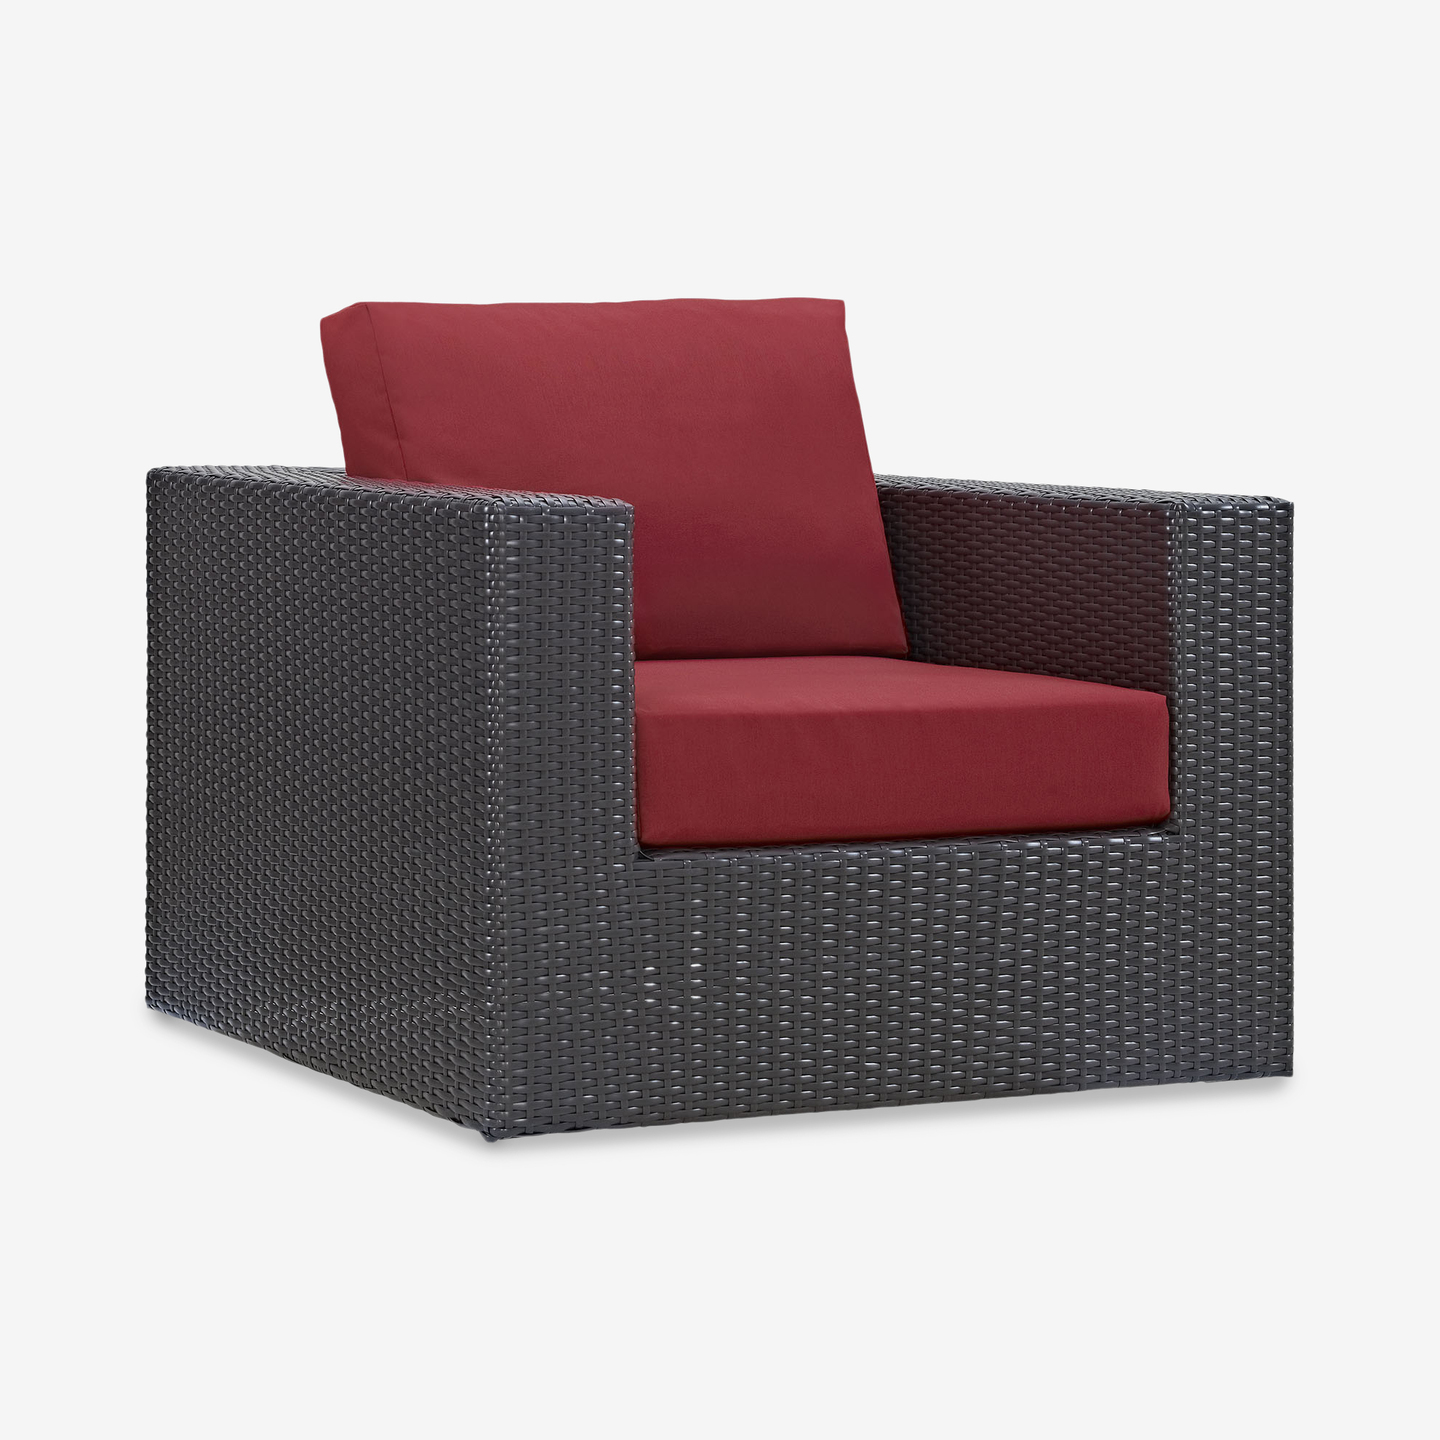 987_Convene-Outdoor-Lounge-Red_3Q_2020